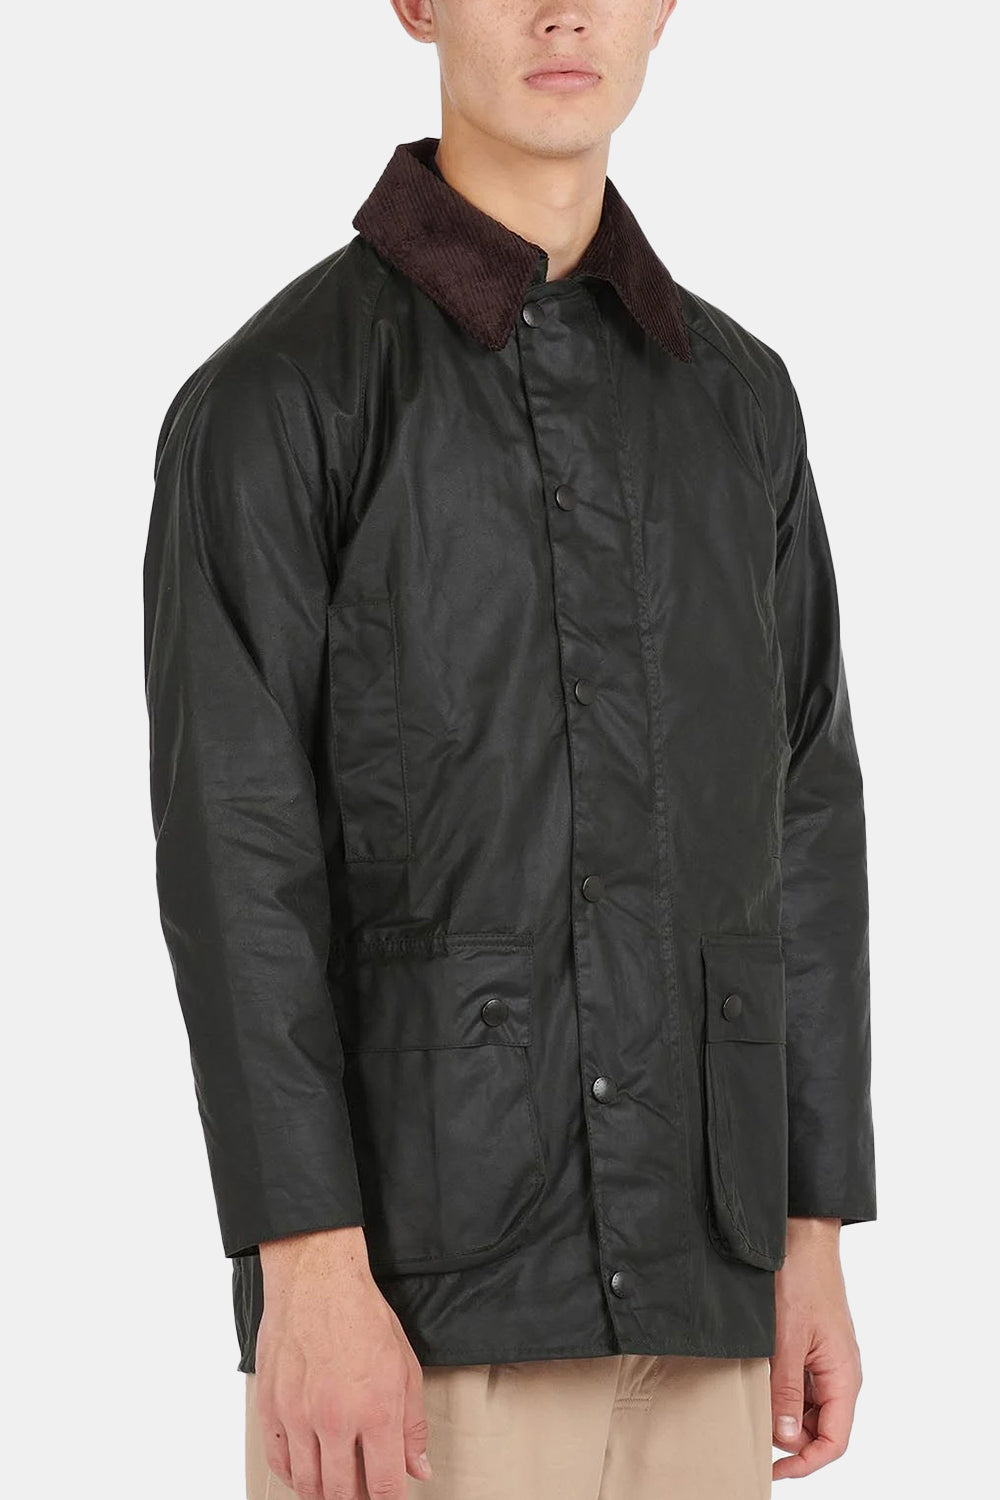 Barbour White Label SL Beaufort Waxed Cotton Jacket (Sage) | Number Six